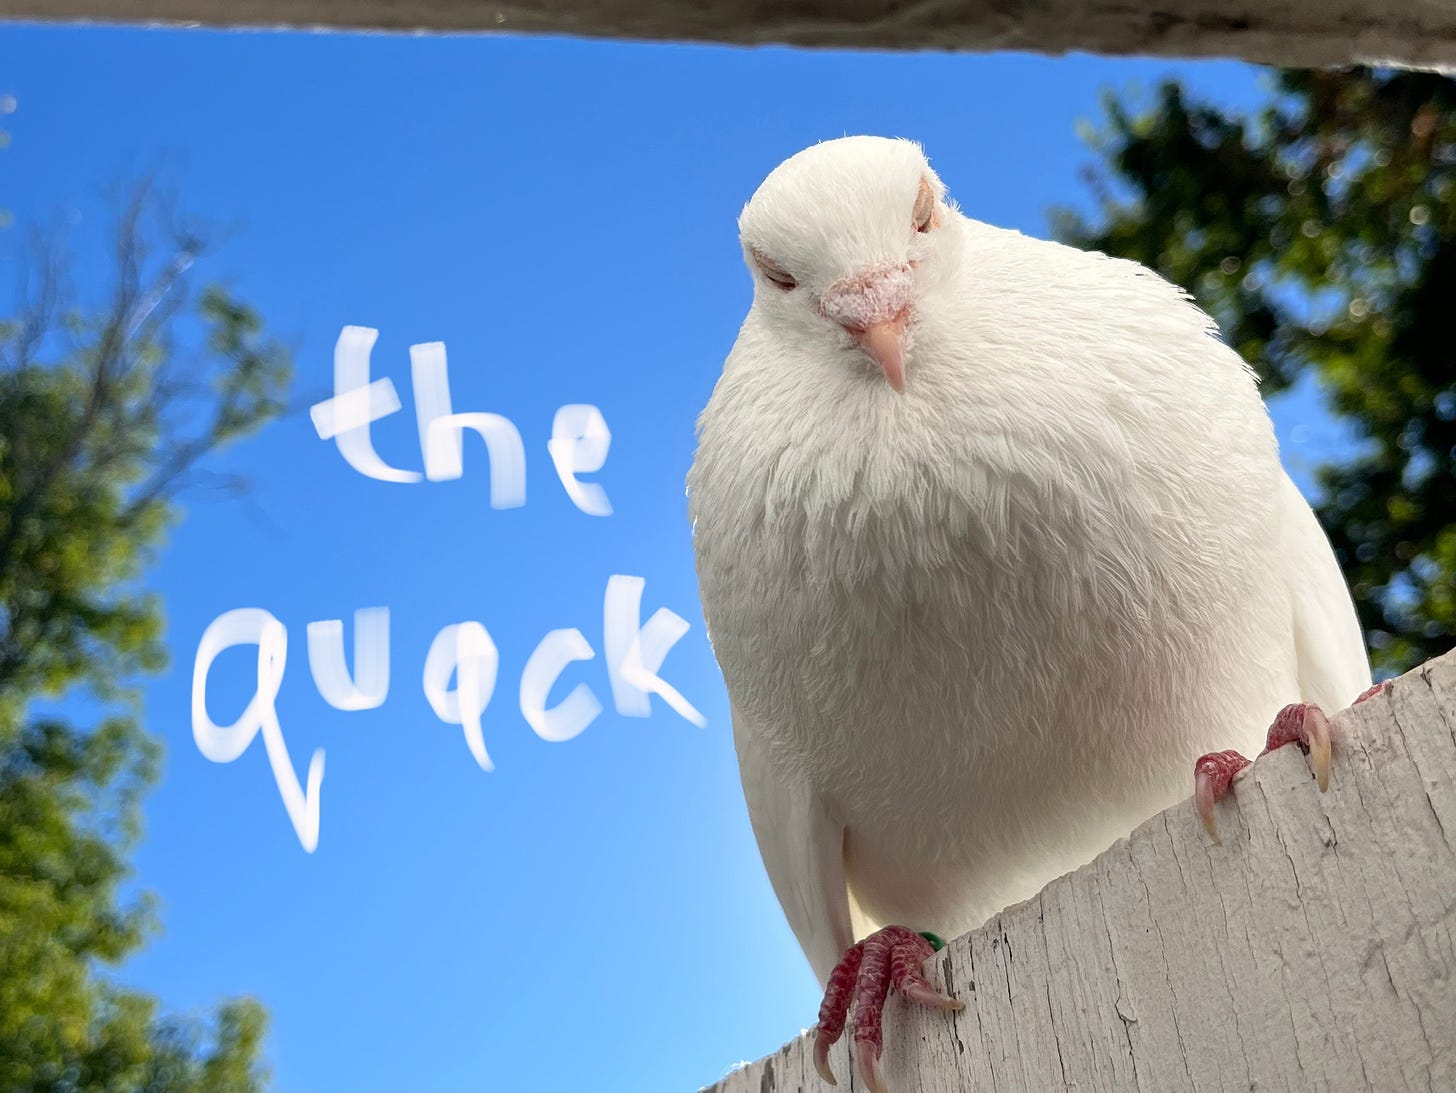 A white pigeon glares down from the top of a painted shed door. the words "the quack" are written in white whispy letters across a bright blue sky